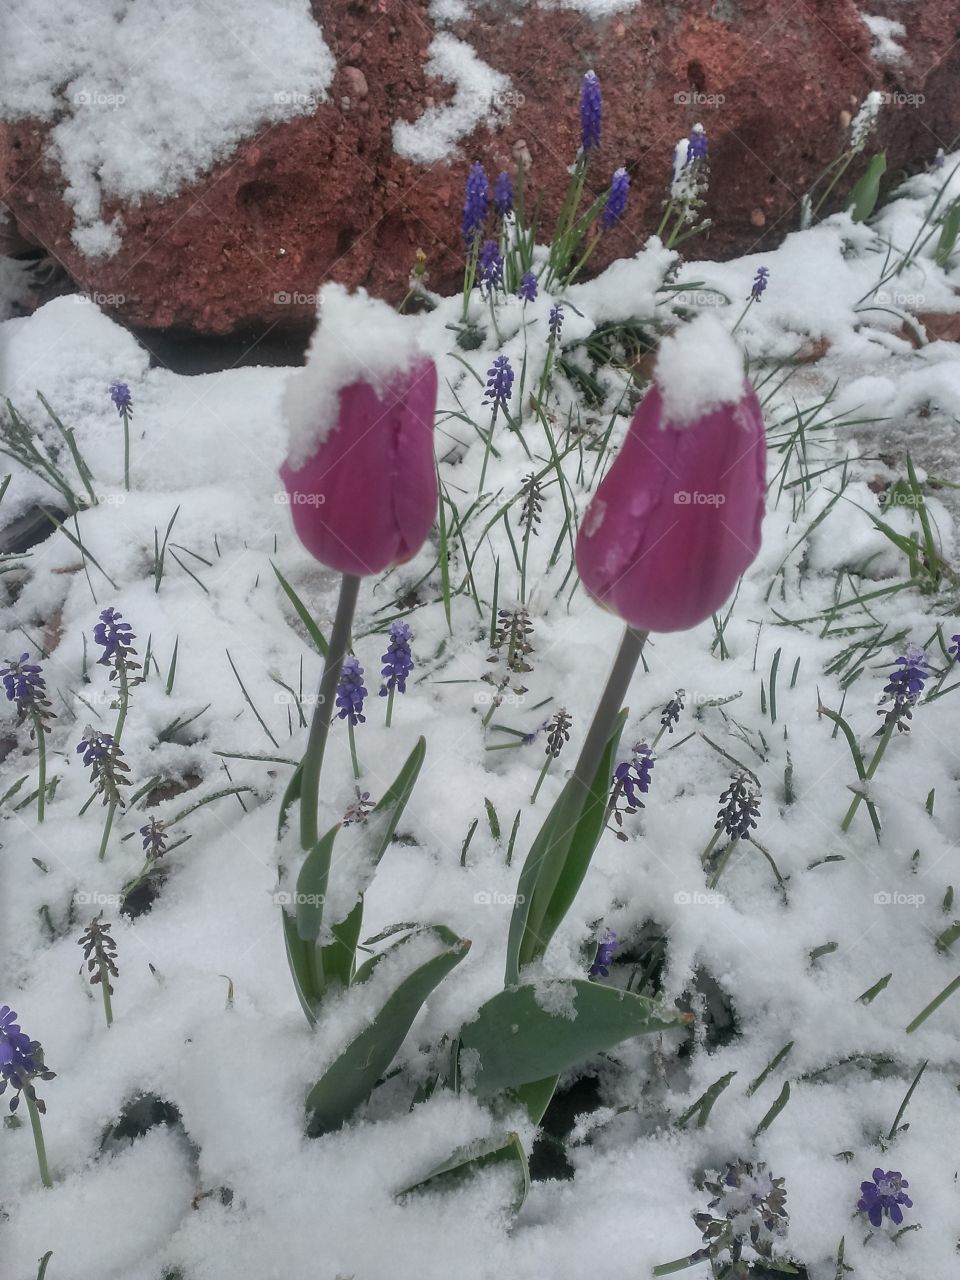 Burgundy tulips in the snow